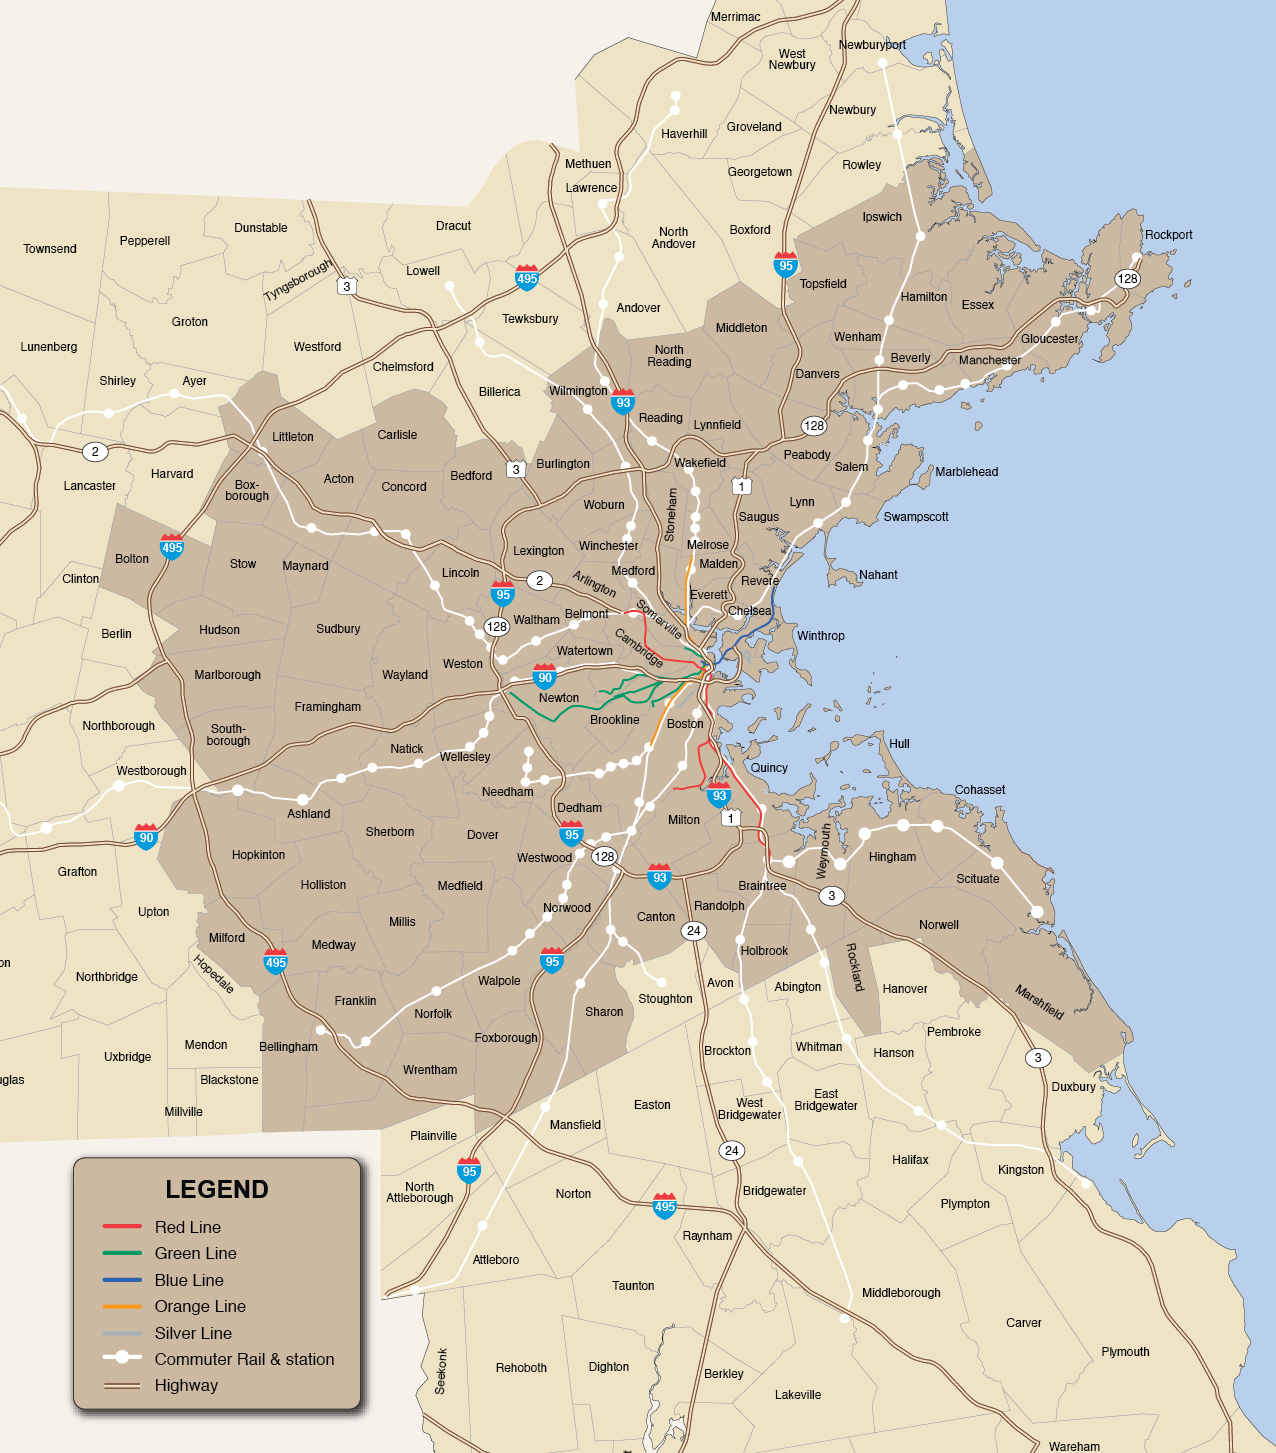 Figure 2-11 is a map showing the Boston Region MPO area by municipality, rapid transit lines, commuter rail lines and stations, and highways.